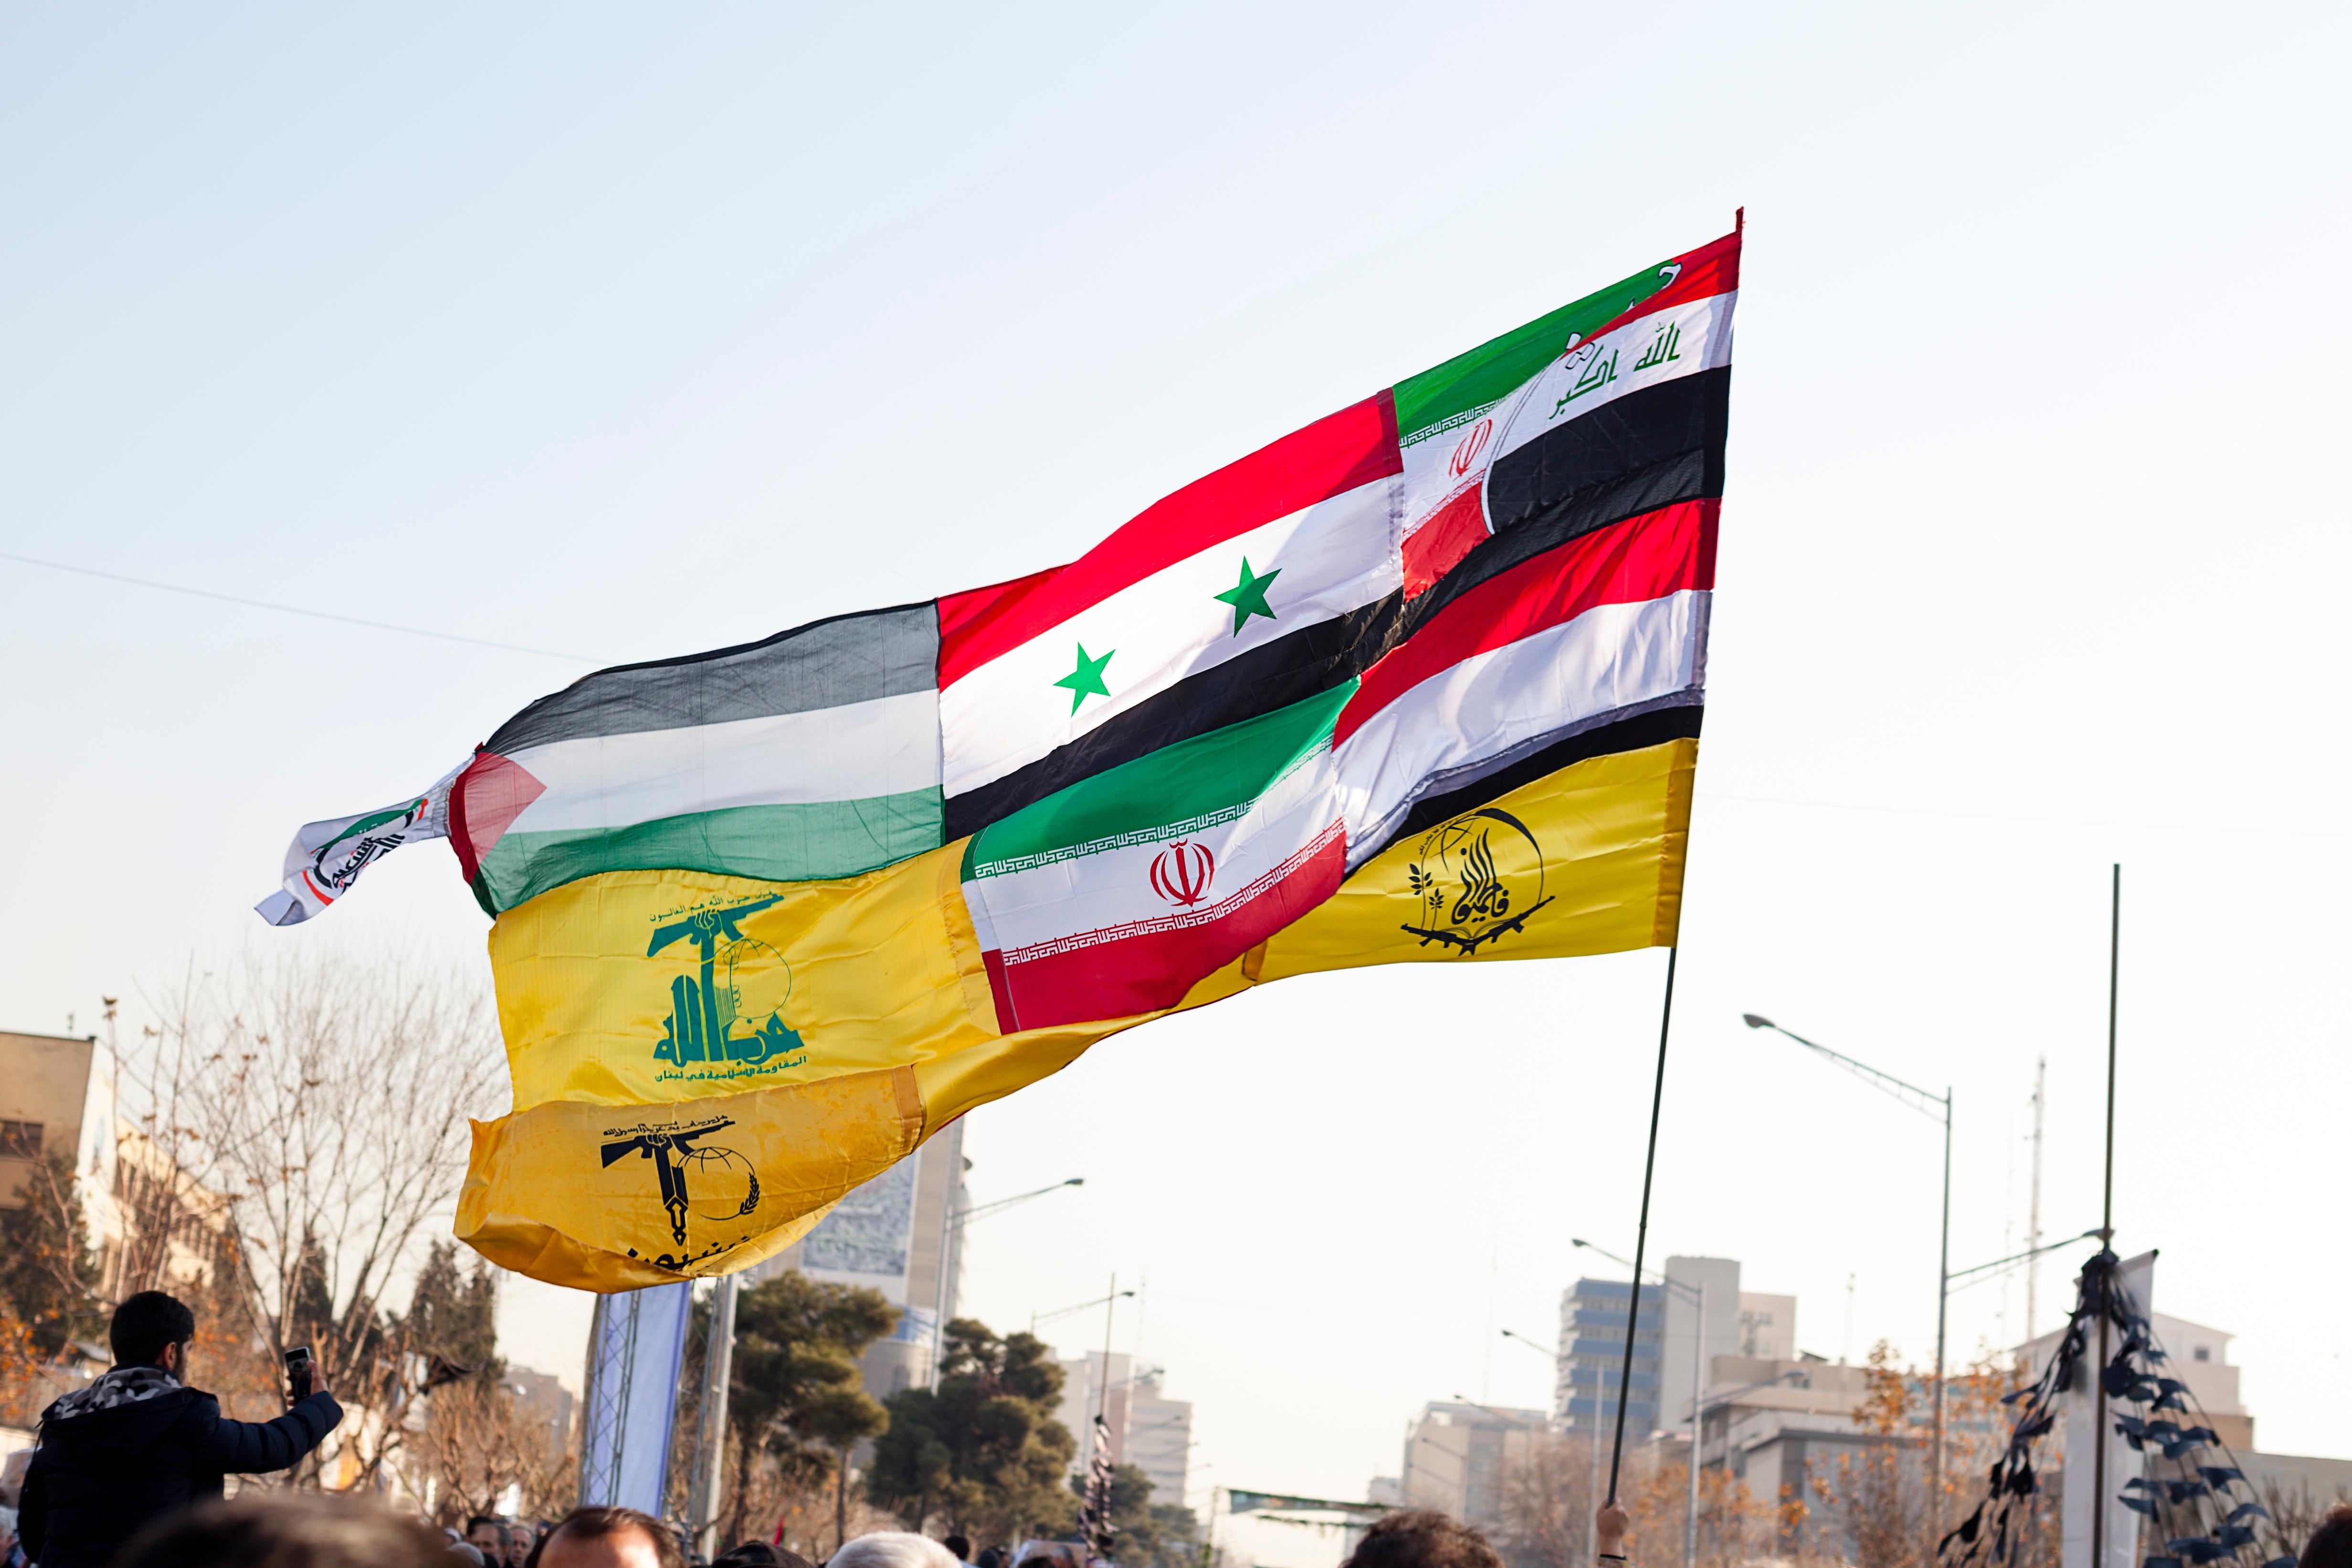 The flags of the allied resistance groups with Iran, the flags of Hamas, Hezbollah, Yemen, Iraq, Fatimids, the popular uprising and the Islamic Republic of Iran together. Iran Tehran, Jan 7, 2020.